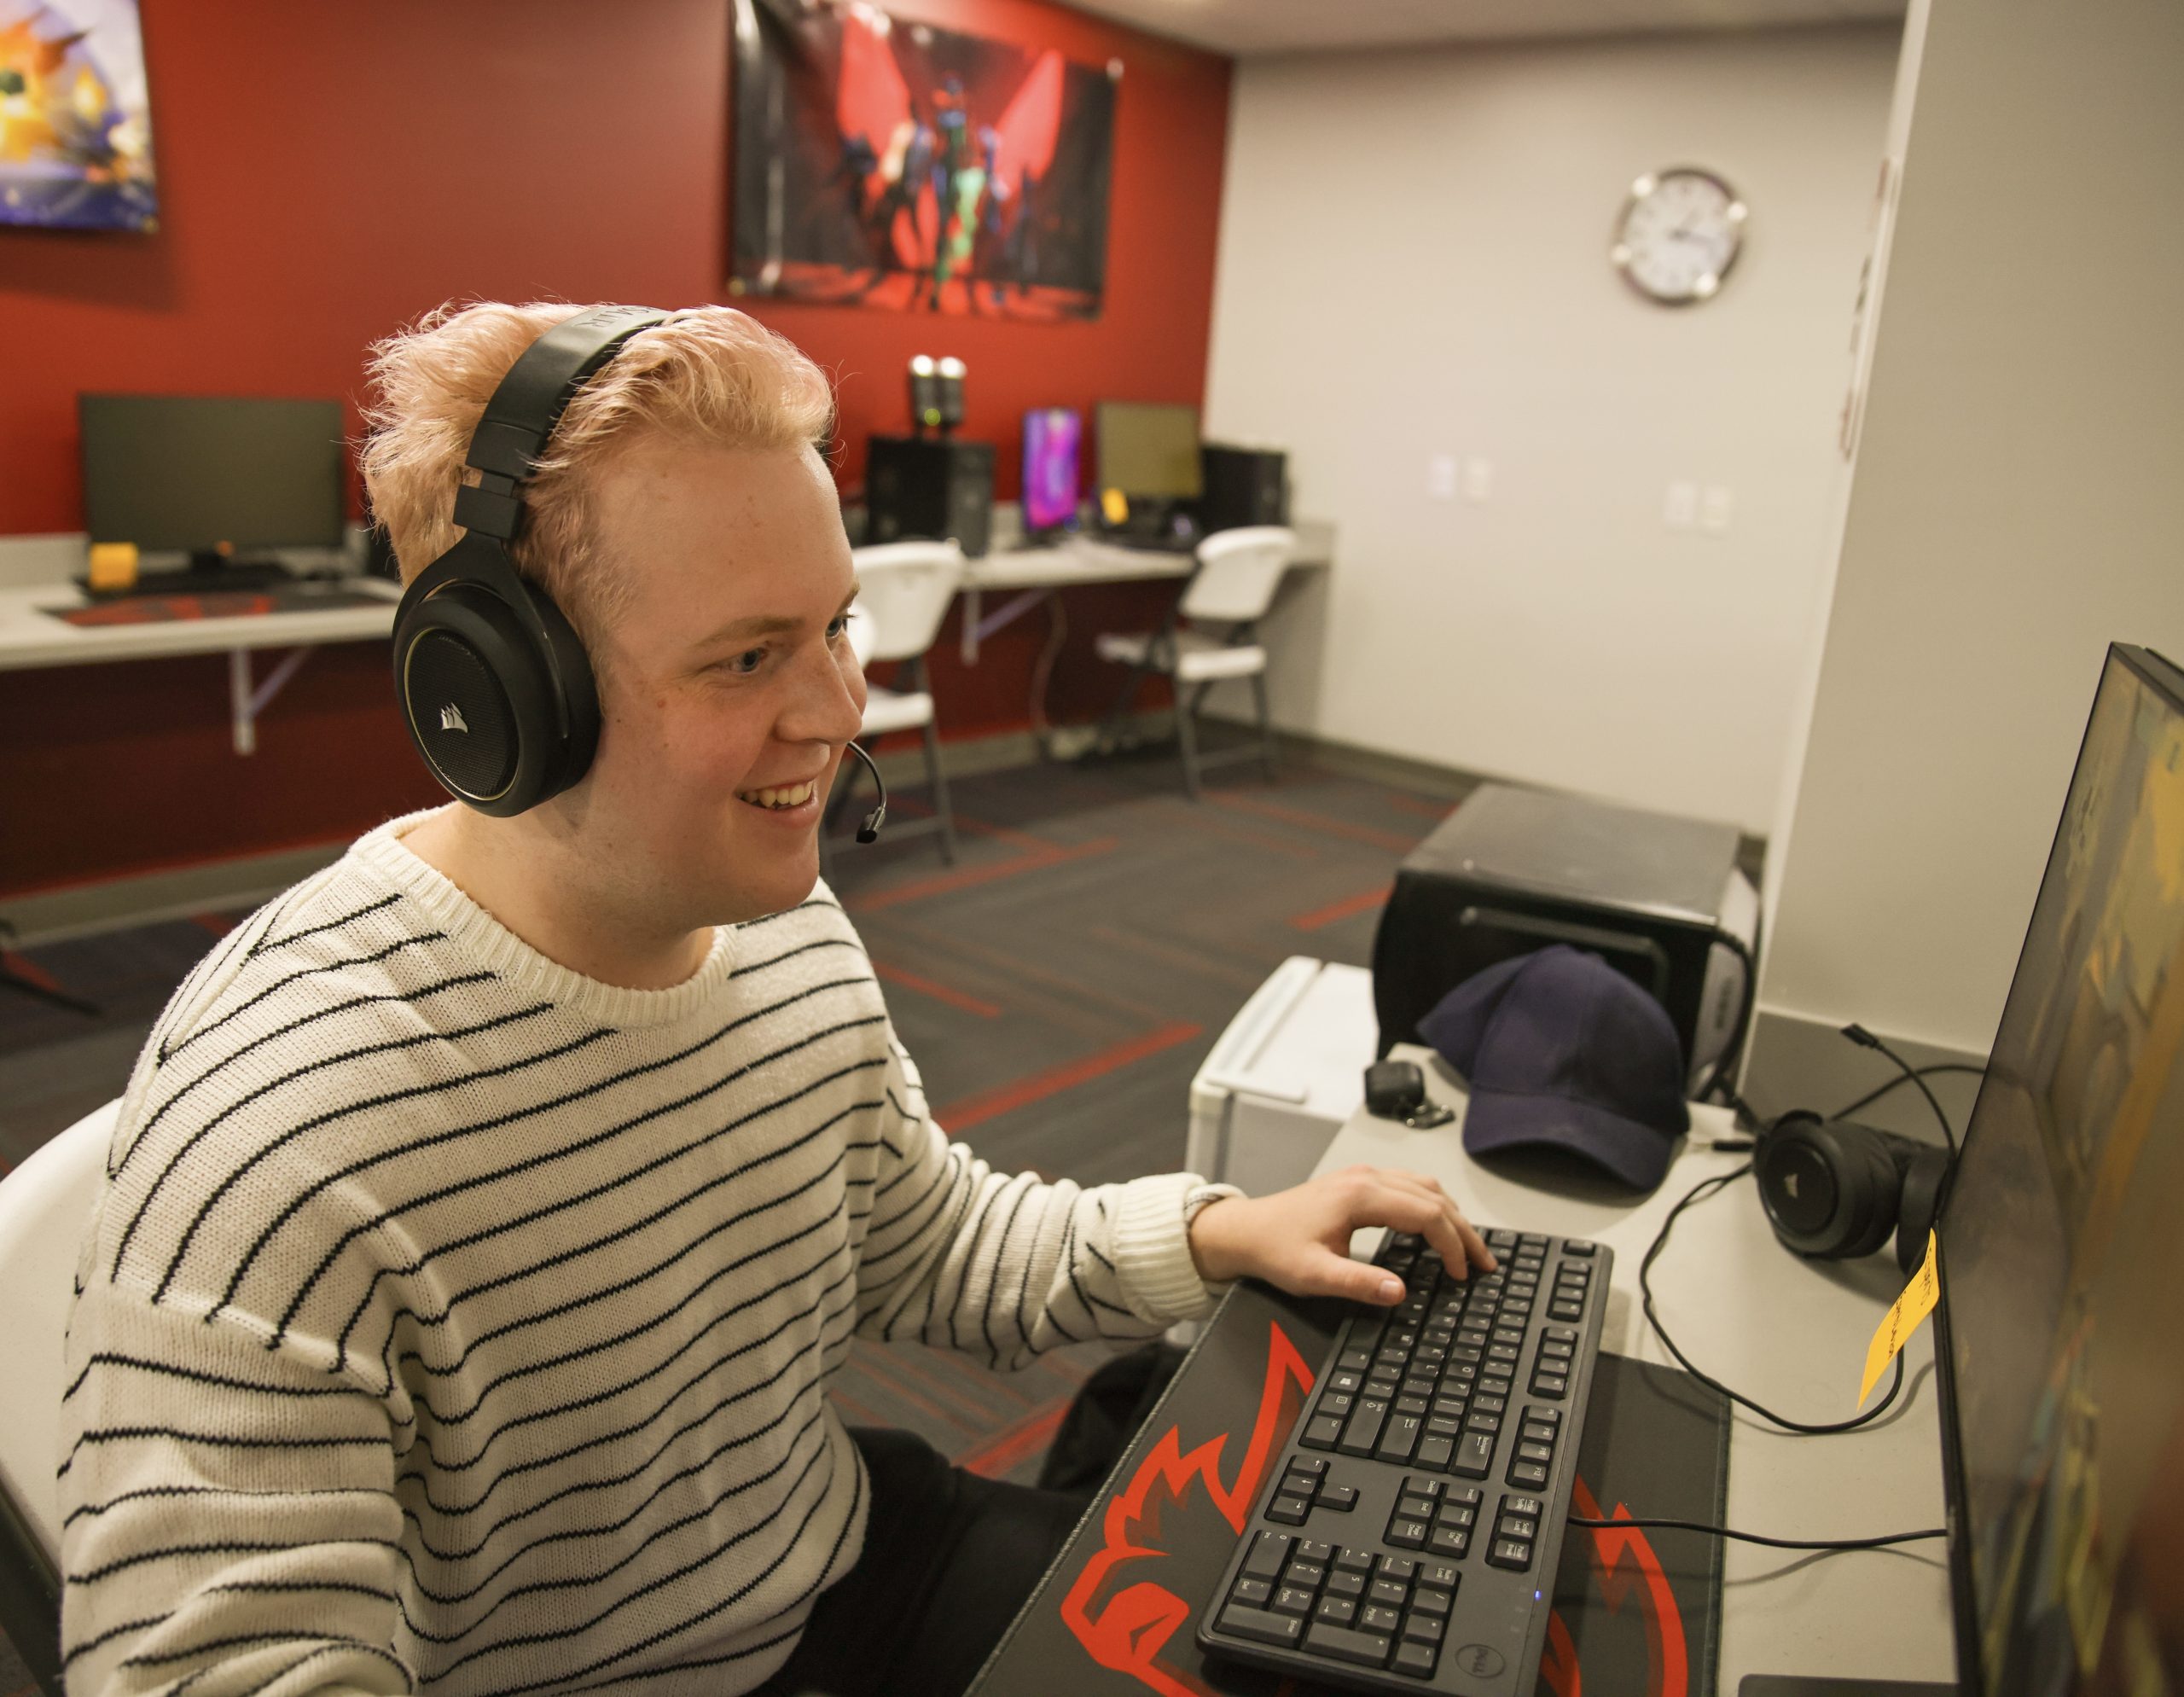 The HPC has welcomed a new sport to the building, the esports club